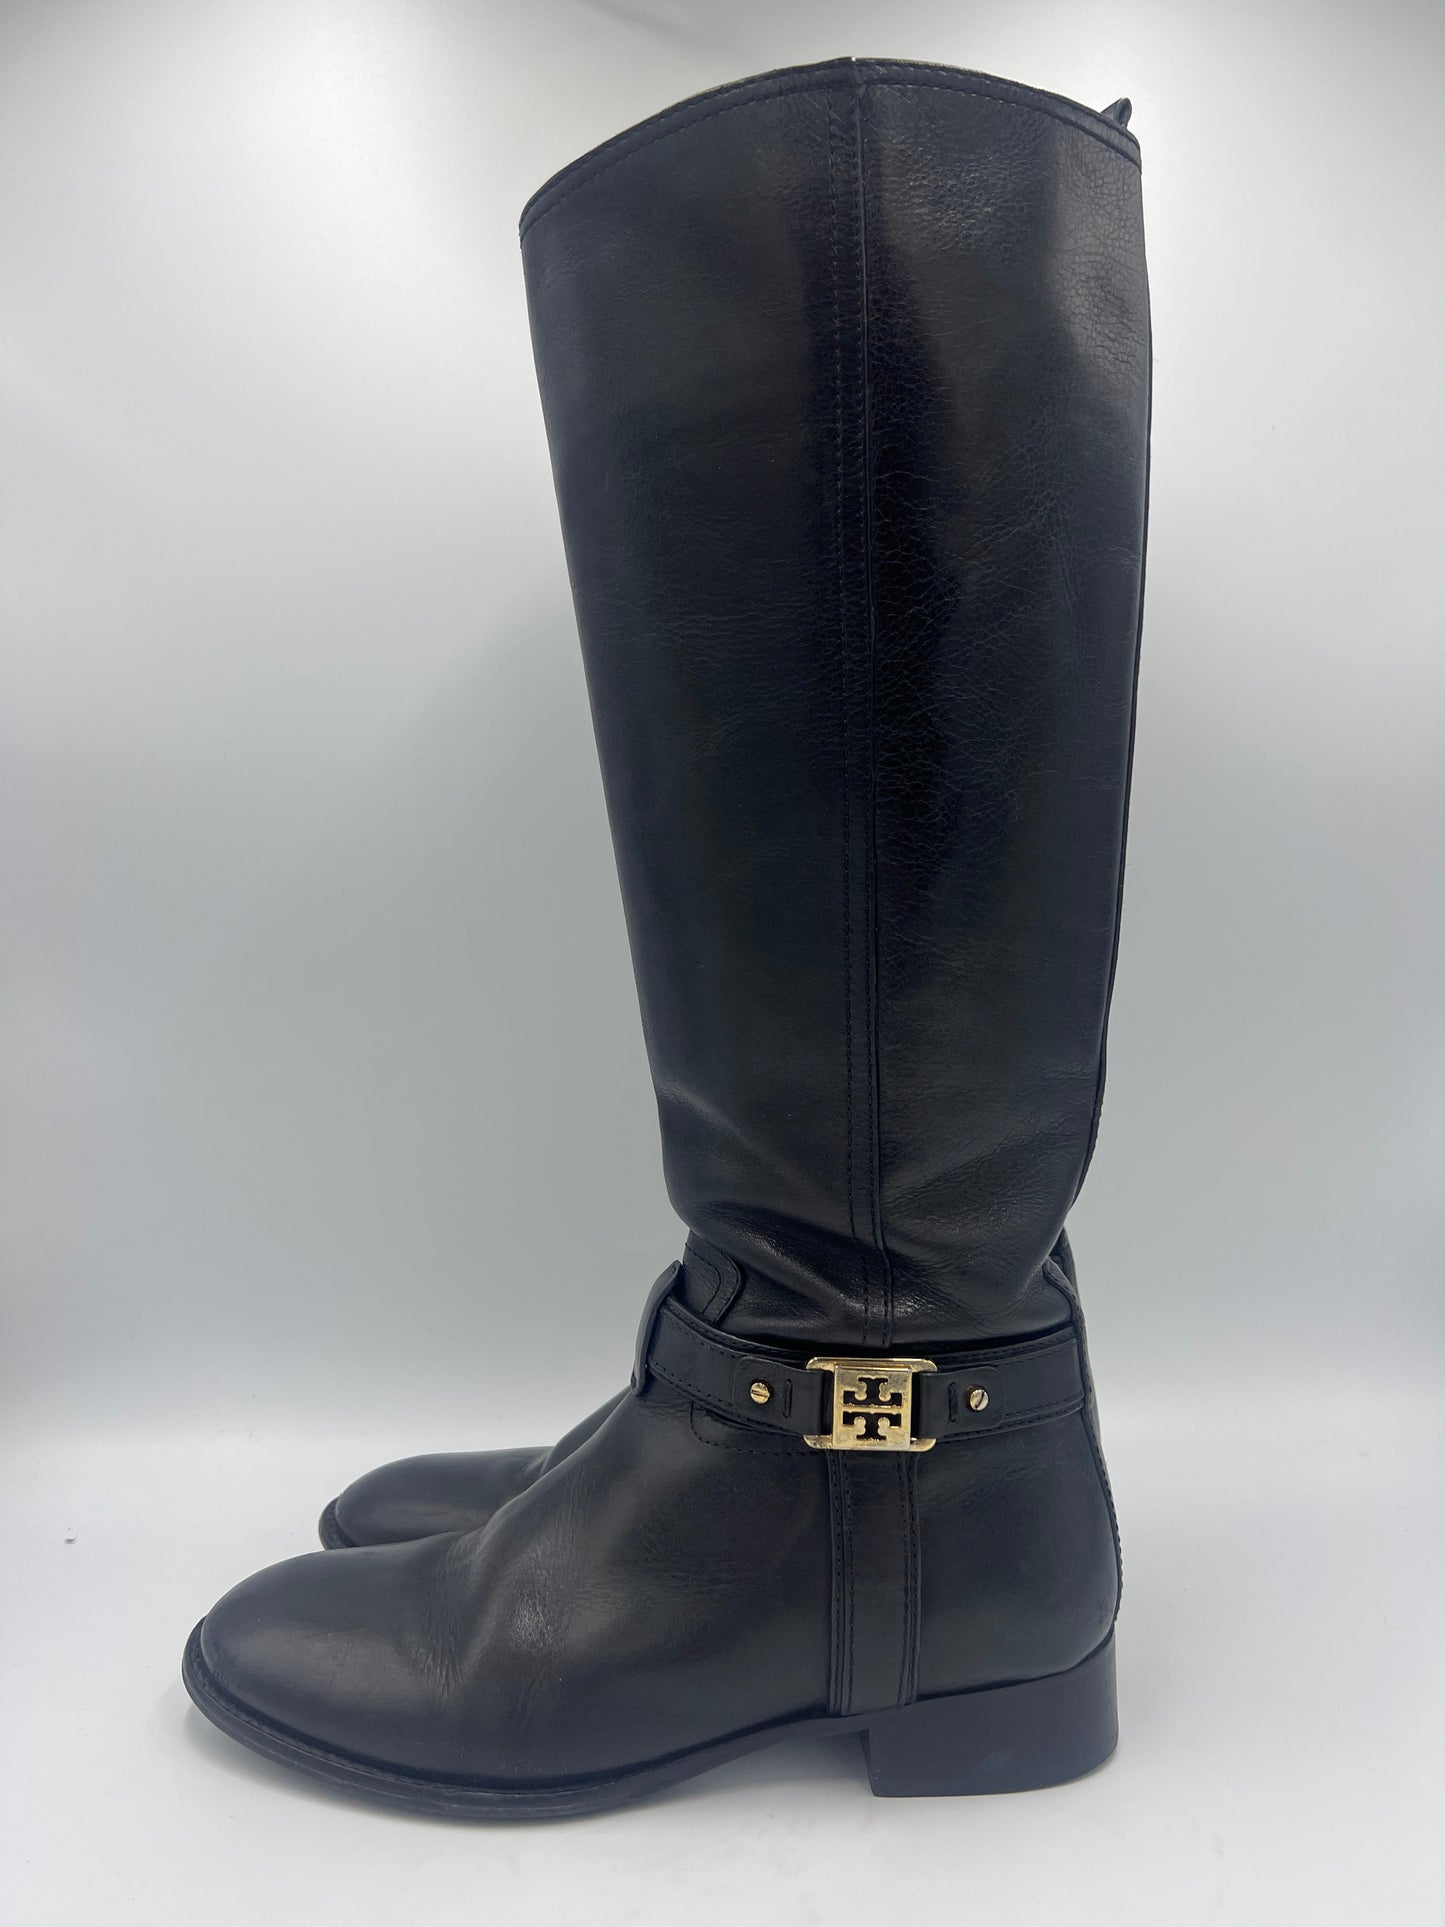 Boots Designer By Tory Burch  Size: 9